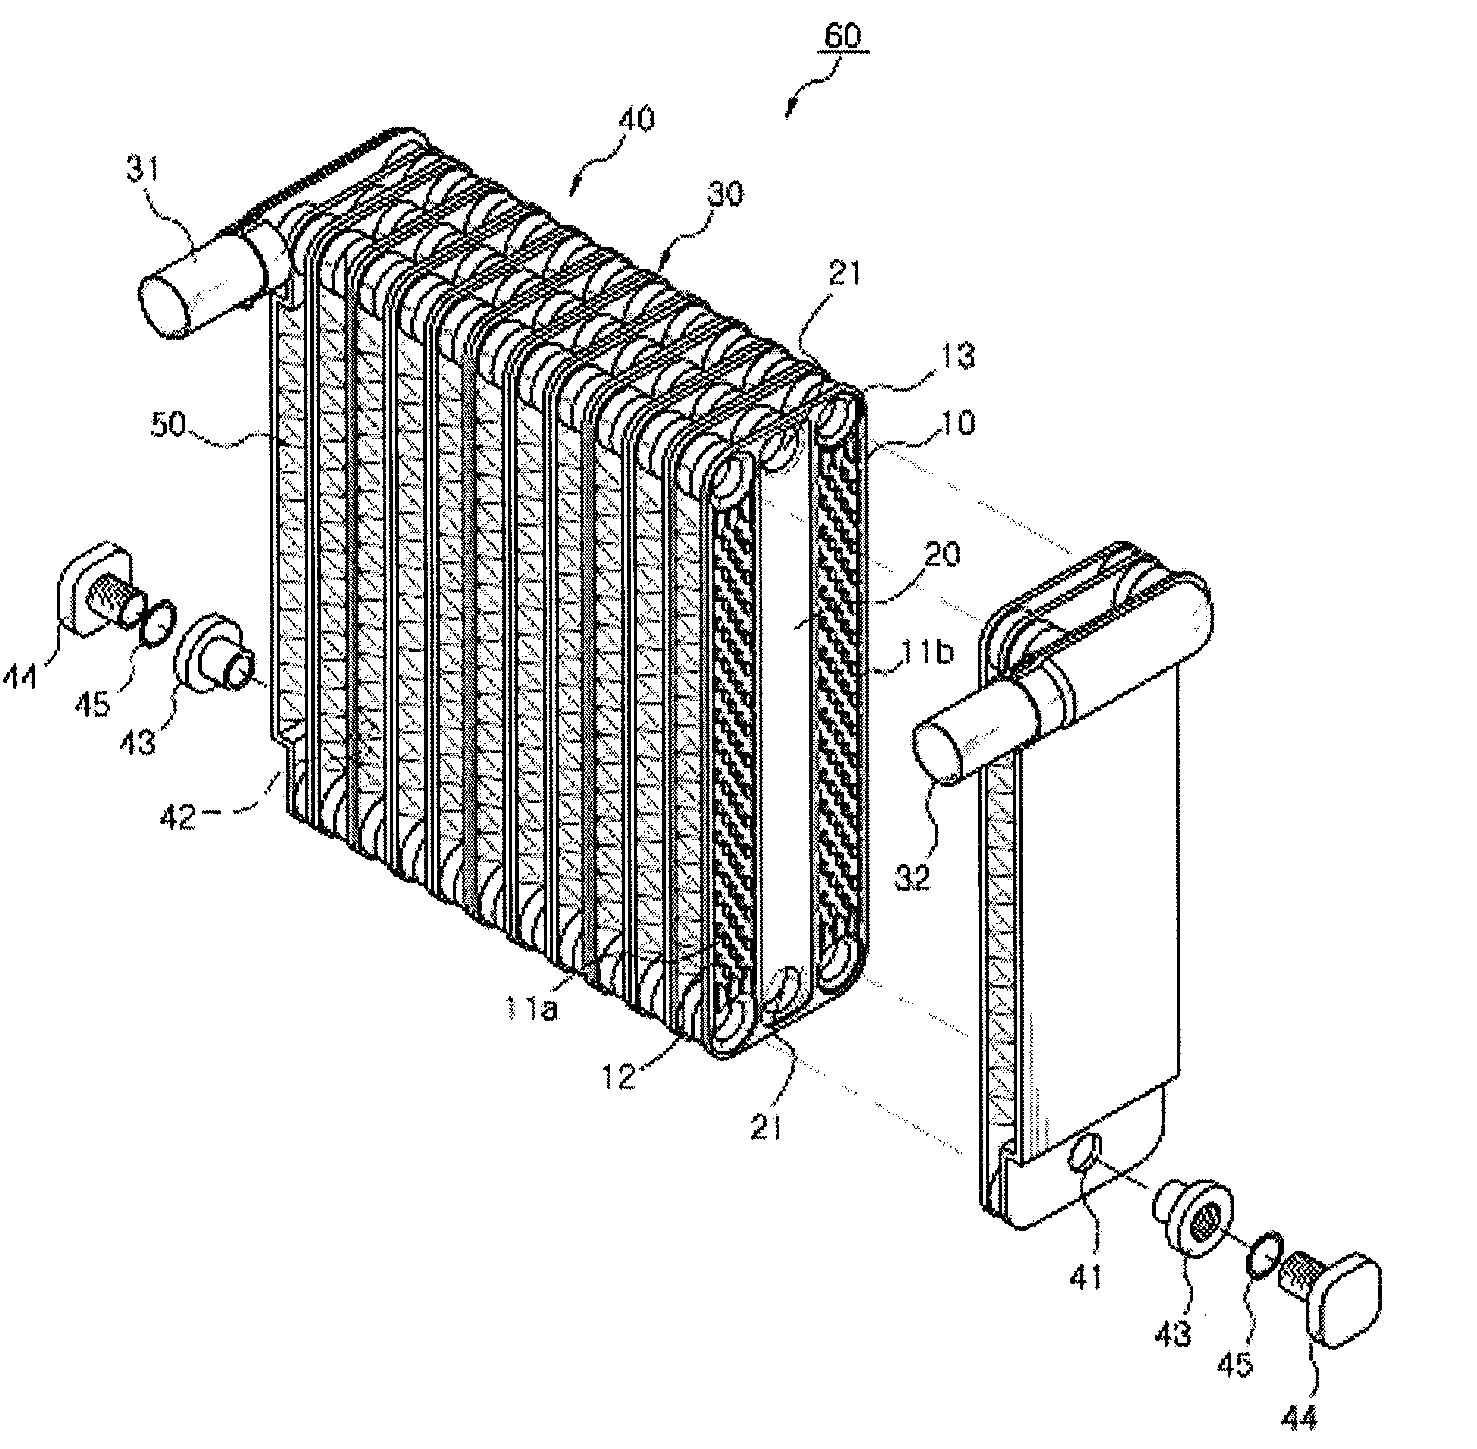 Cold reserving part equipped evaporator